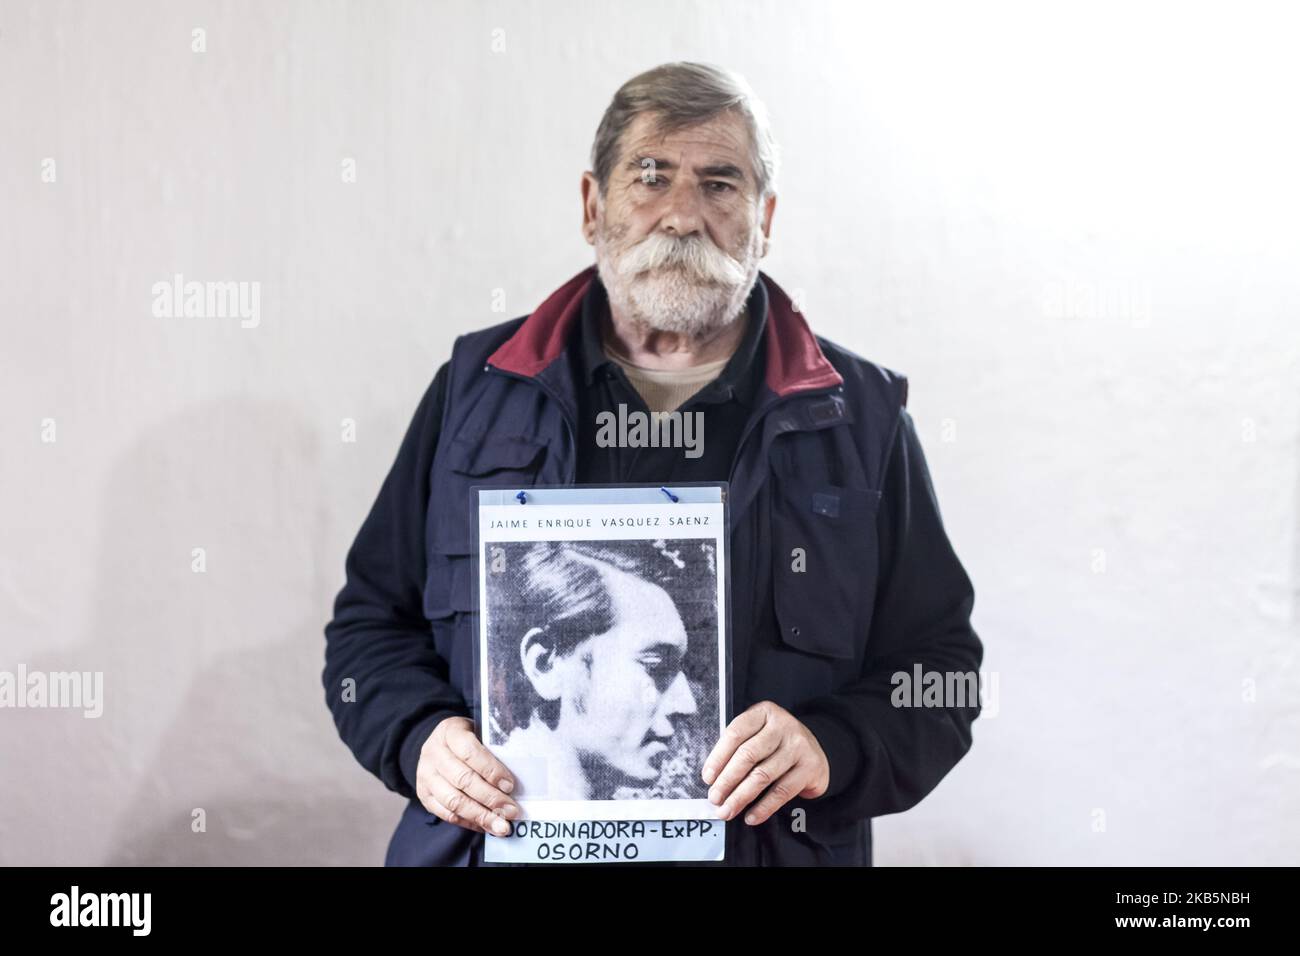 Osorno, Chile. 10 September 2019. Rodolfo Balbontin former member of the Mir and political prisoners during the Chilean military dictatorship. Two former members of the MIR (revolutionary left movement) prepare a photographic exhibition on the Melinka, Puchuncavi political prison camp where they were imprisoned for two years.After the coup d'etat of September 11, 1973, some popular spas were enabled as political prison camps and / or detention centers including Puchuncavi in charge of the Chilean army.One of the important milestones in the history of this site occurred in June 1974, when withi Stock Photo